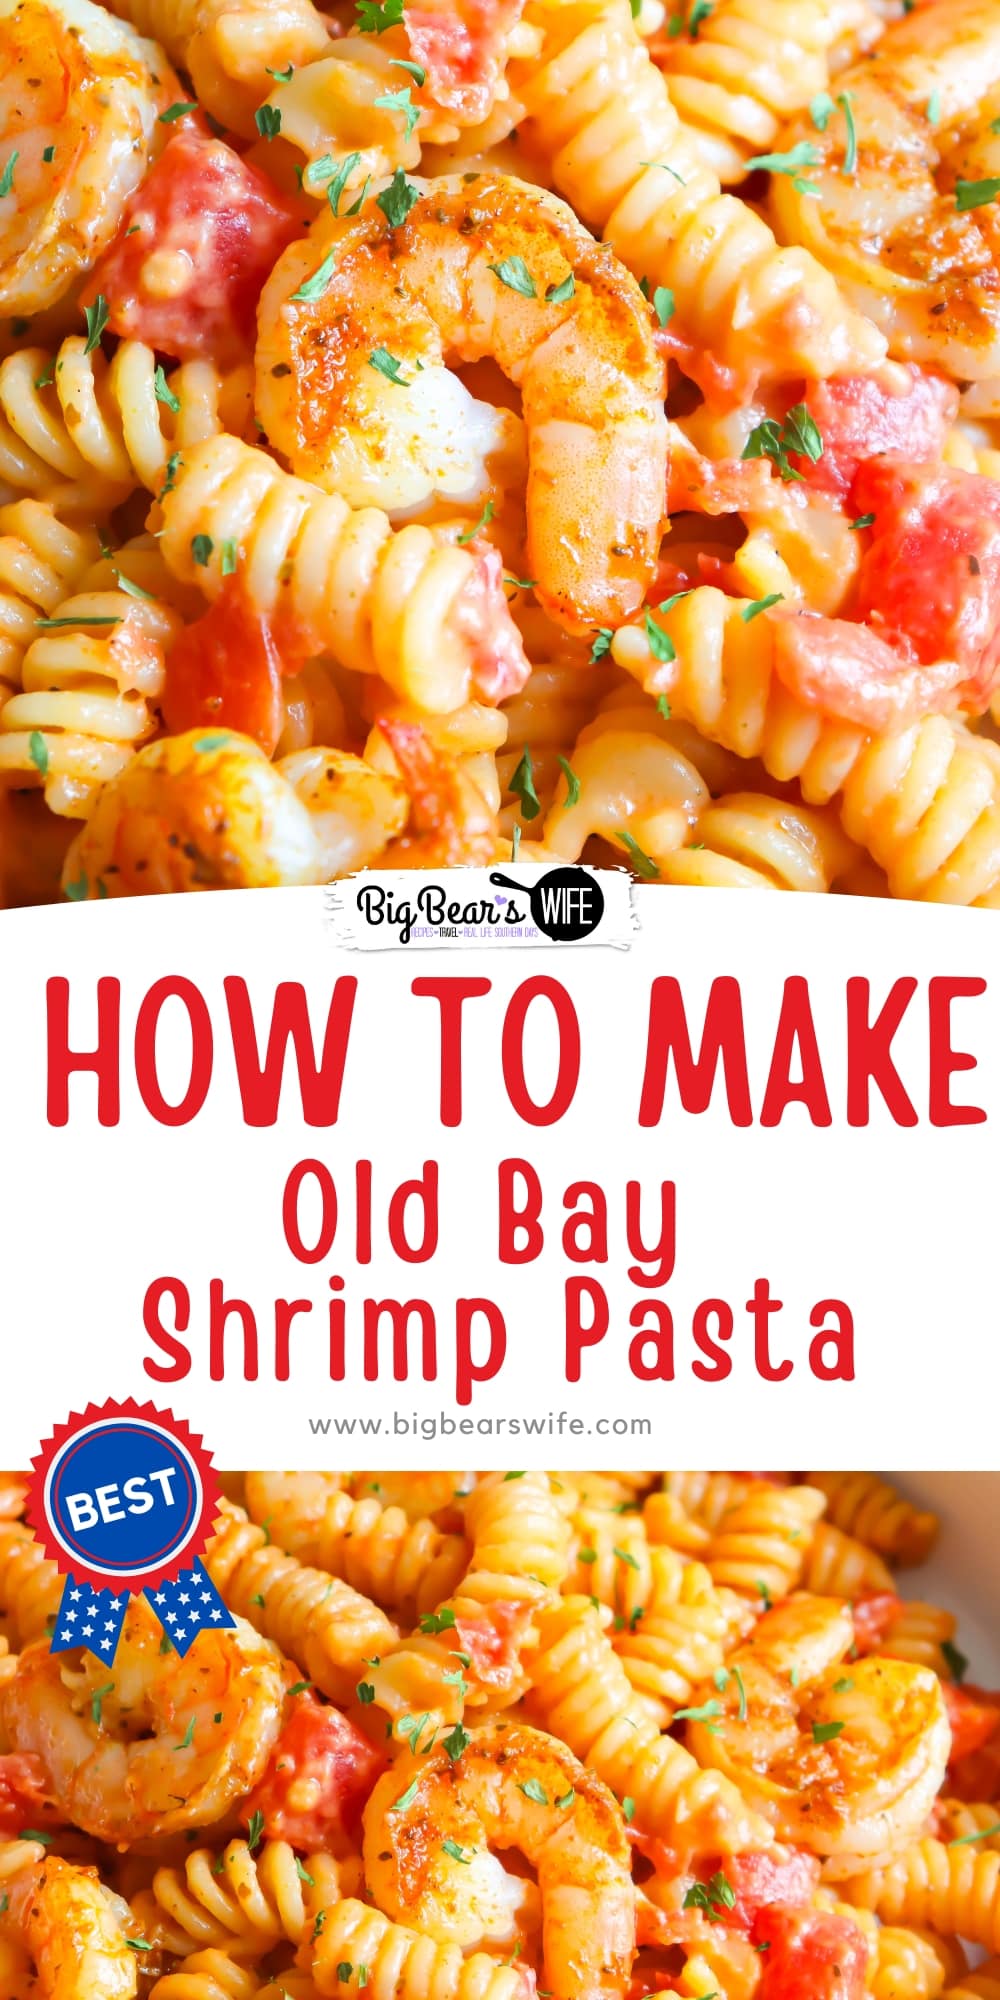 Short on time? No problem. Delicious Old Bay Shrimp Pasta is ready in under 30 minutes. This pasta meal is perfect for a quick and tasty dinner. via @bigbearswife